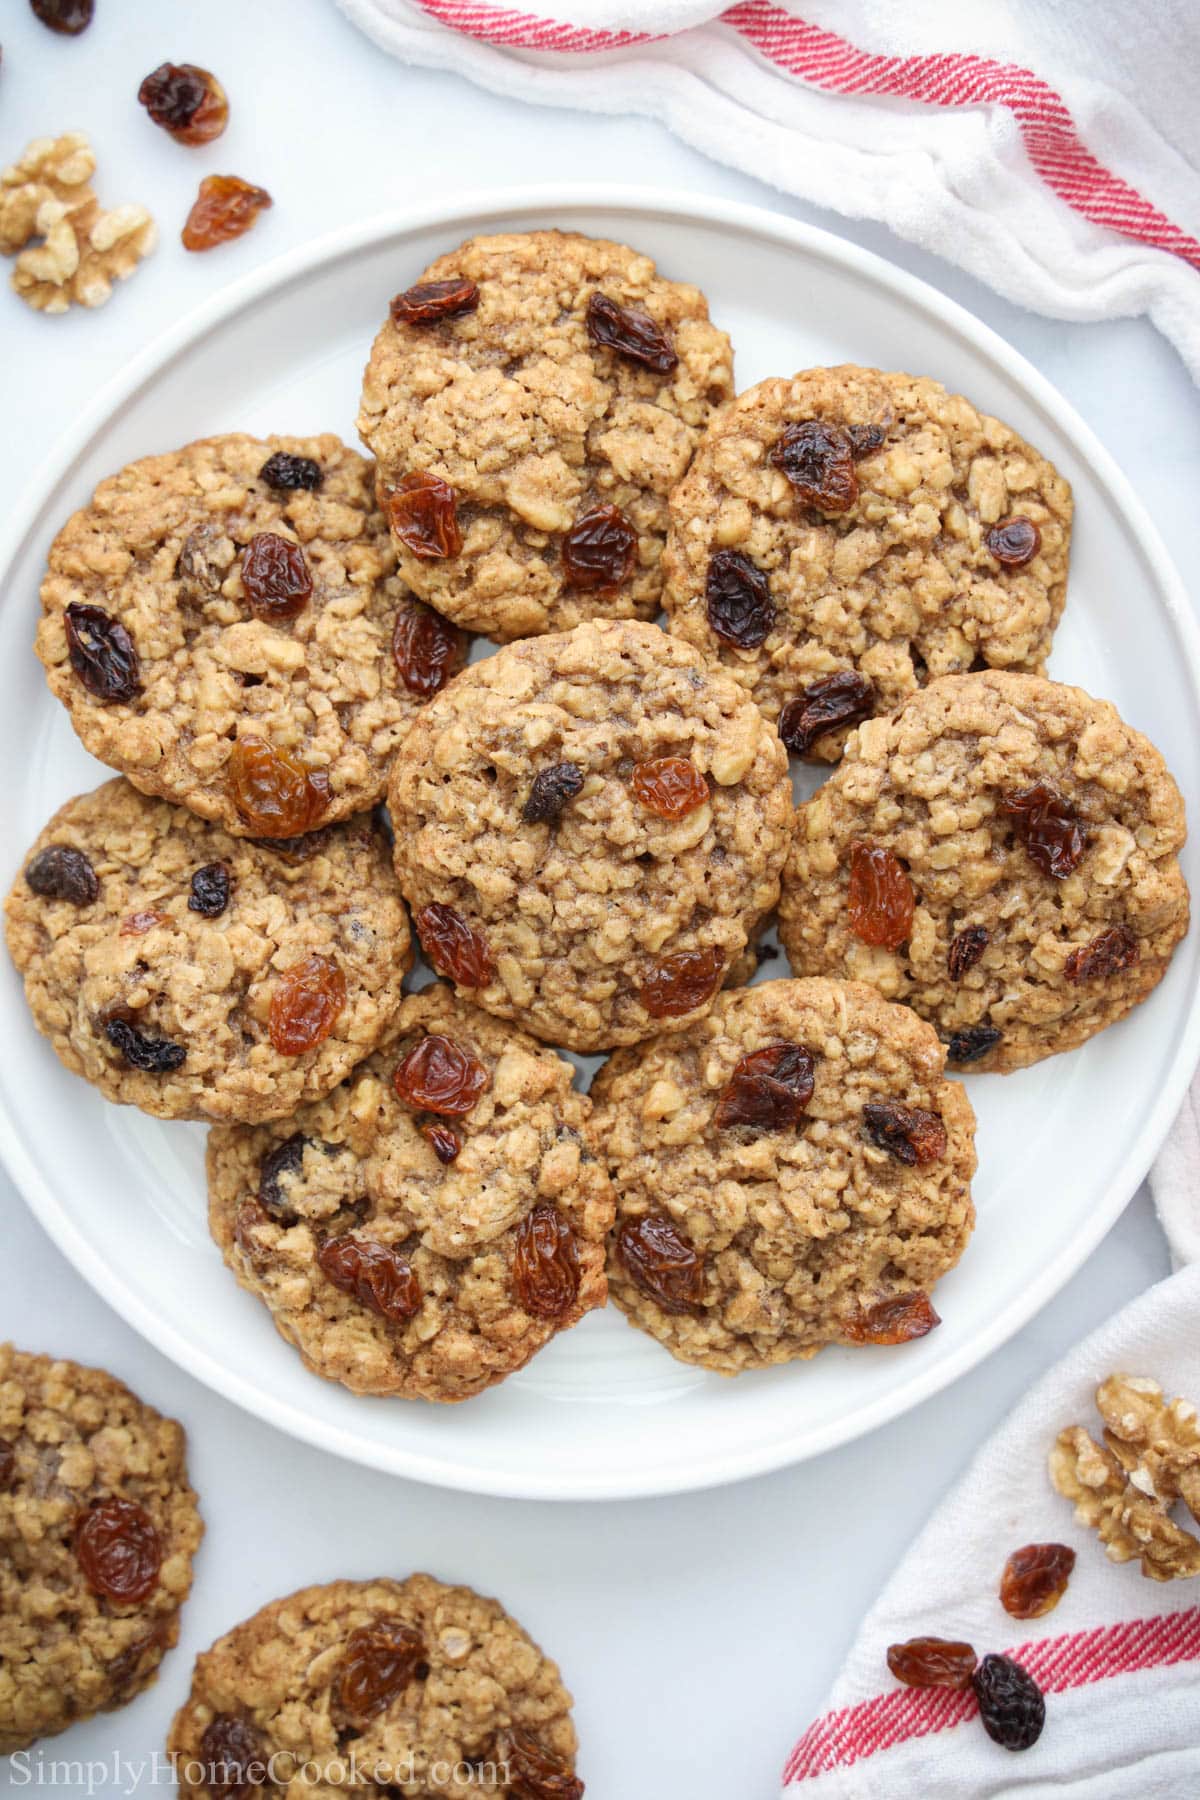 Plate of Chewy Oatmeal Raisin Cookies.